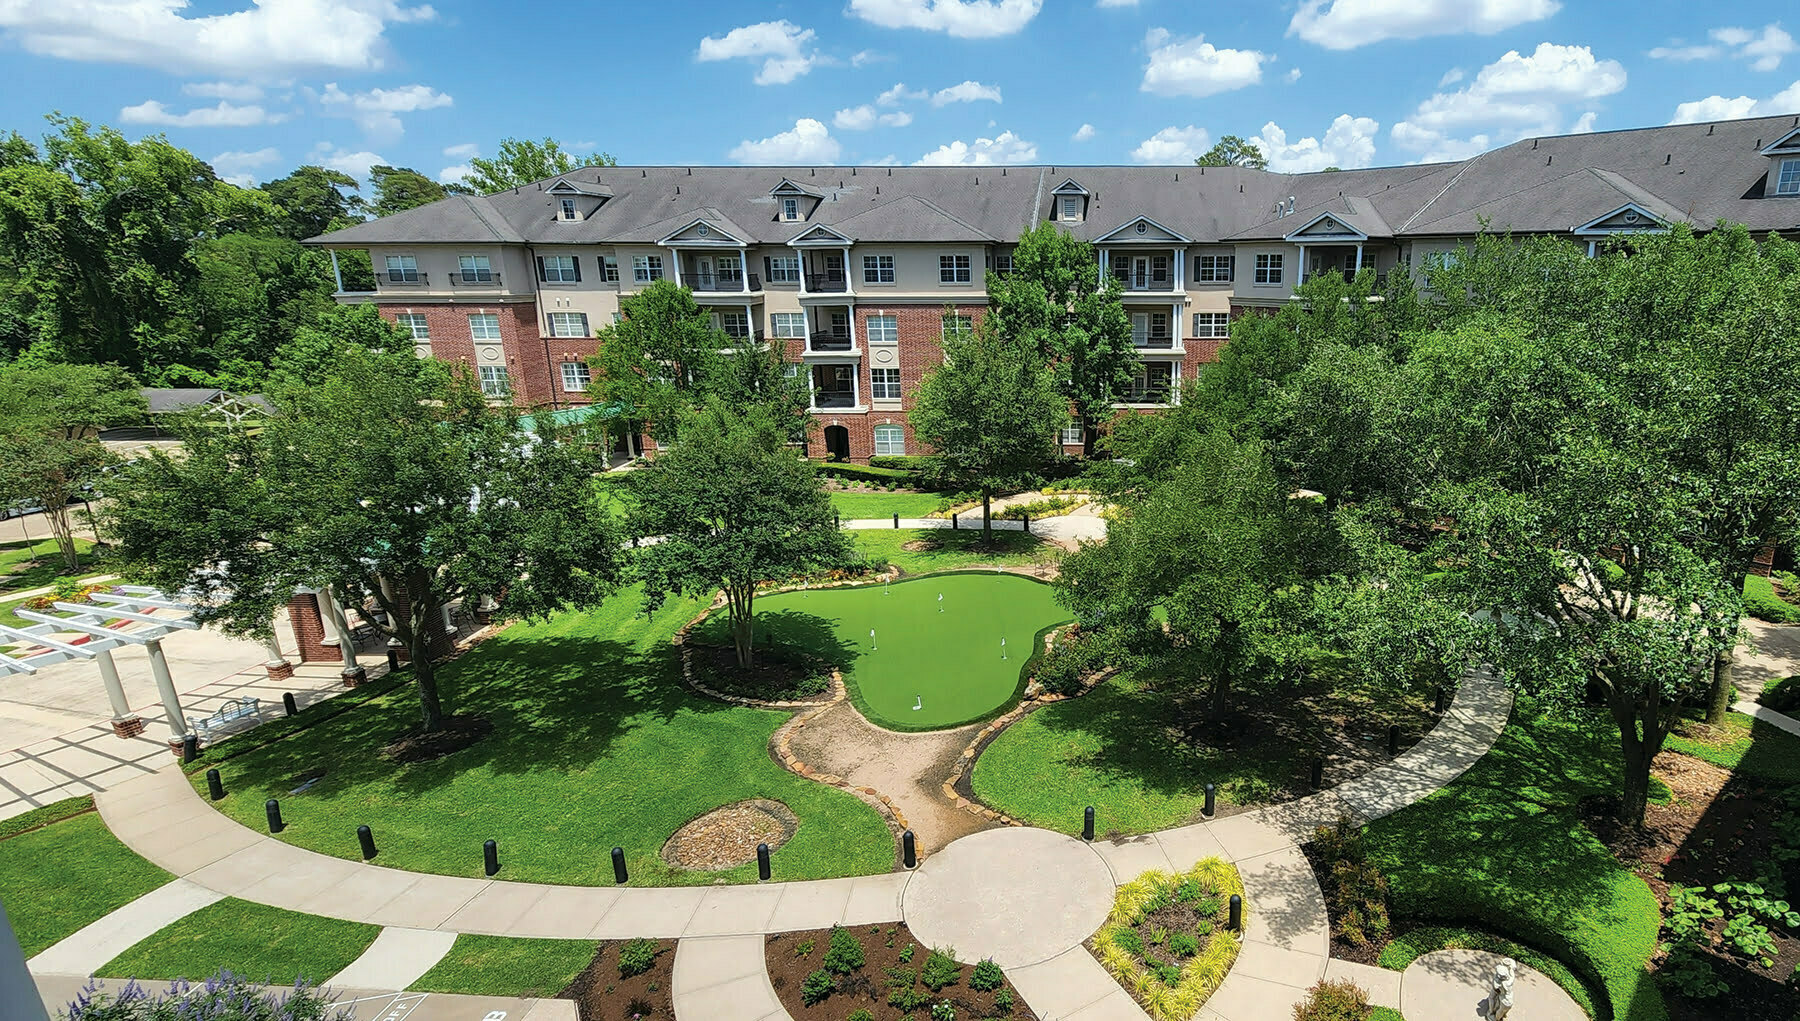 aerial view of grand courtyard sidewalks lush green grass trees in front of large senior living options